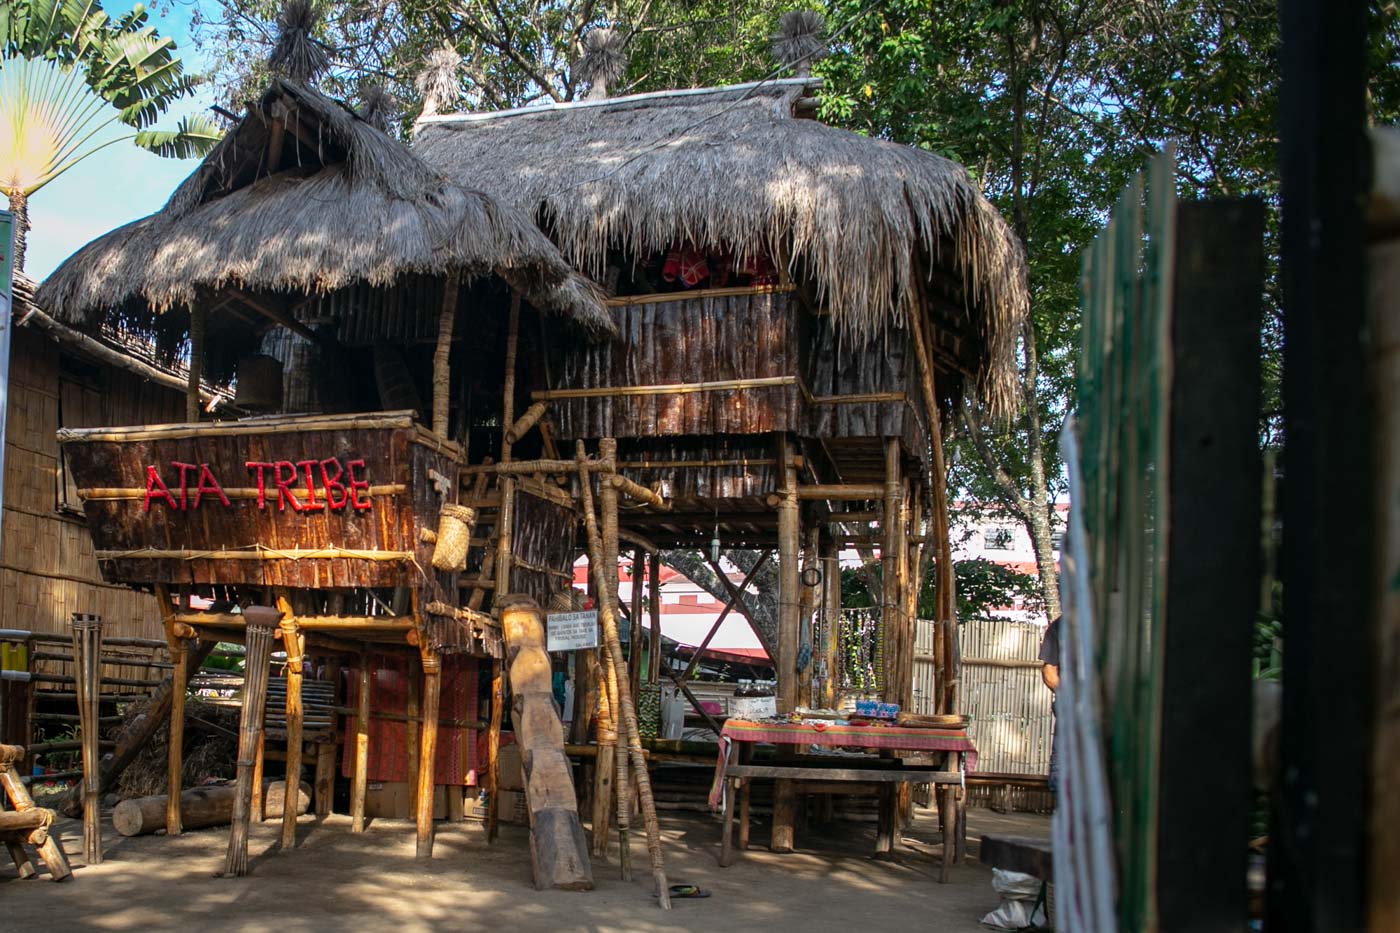 The tribal house of the Ata tribe has walls made from tree bark and stairs carved from a single piece of log.
 